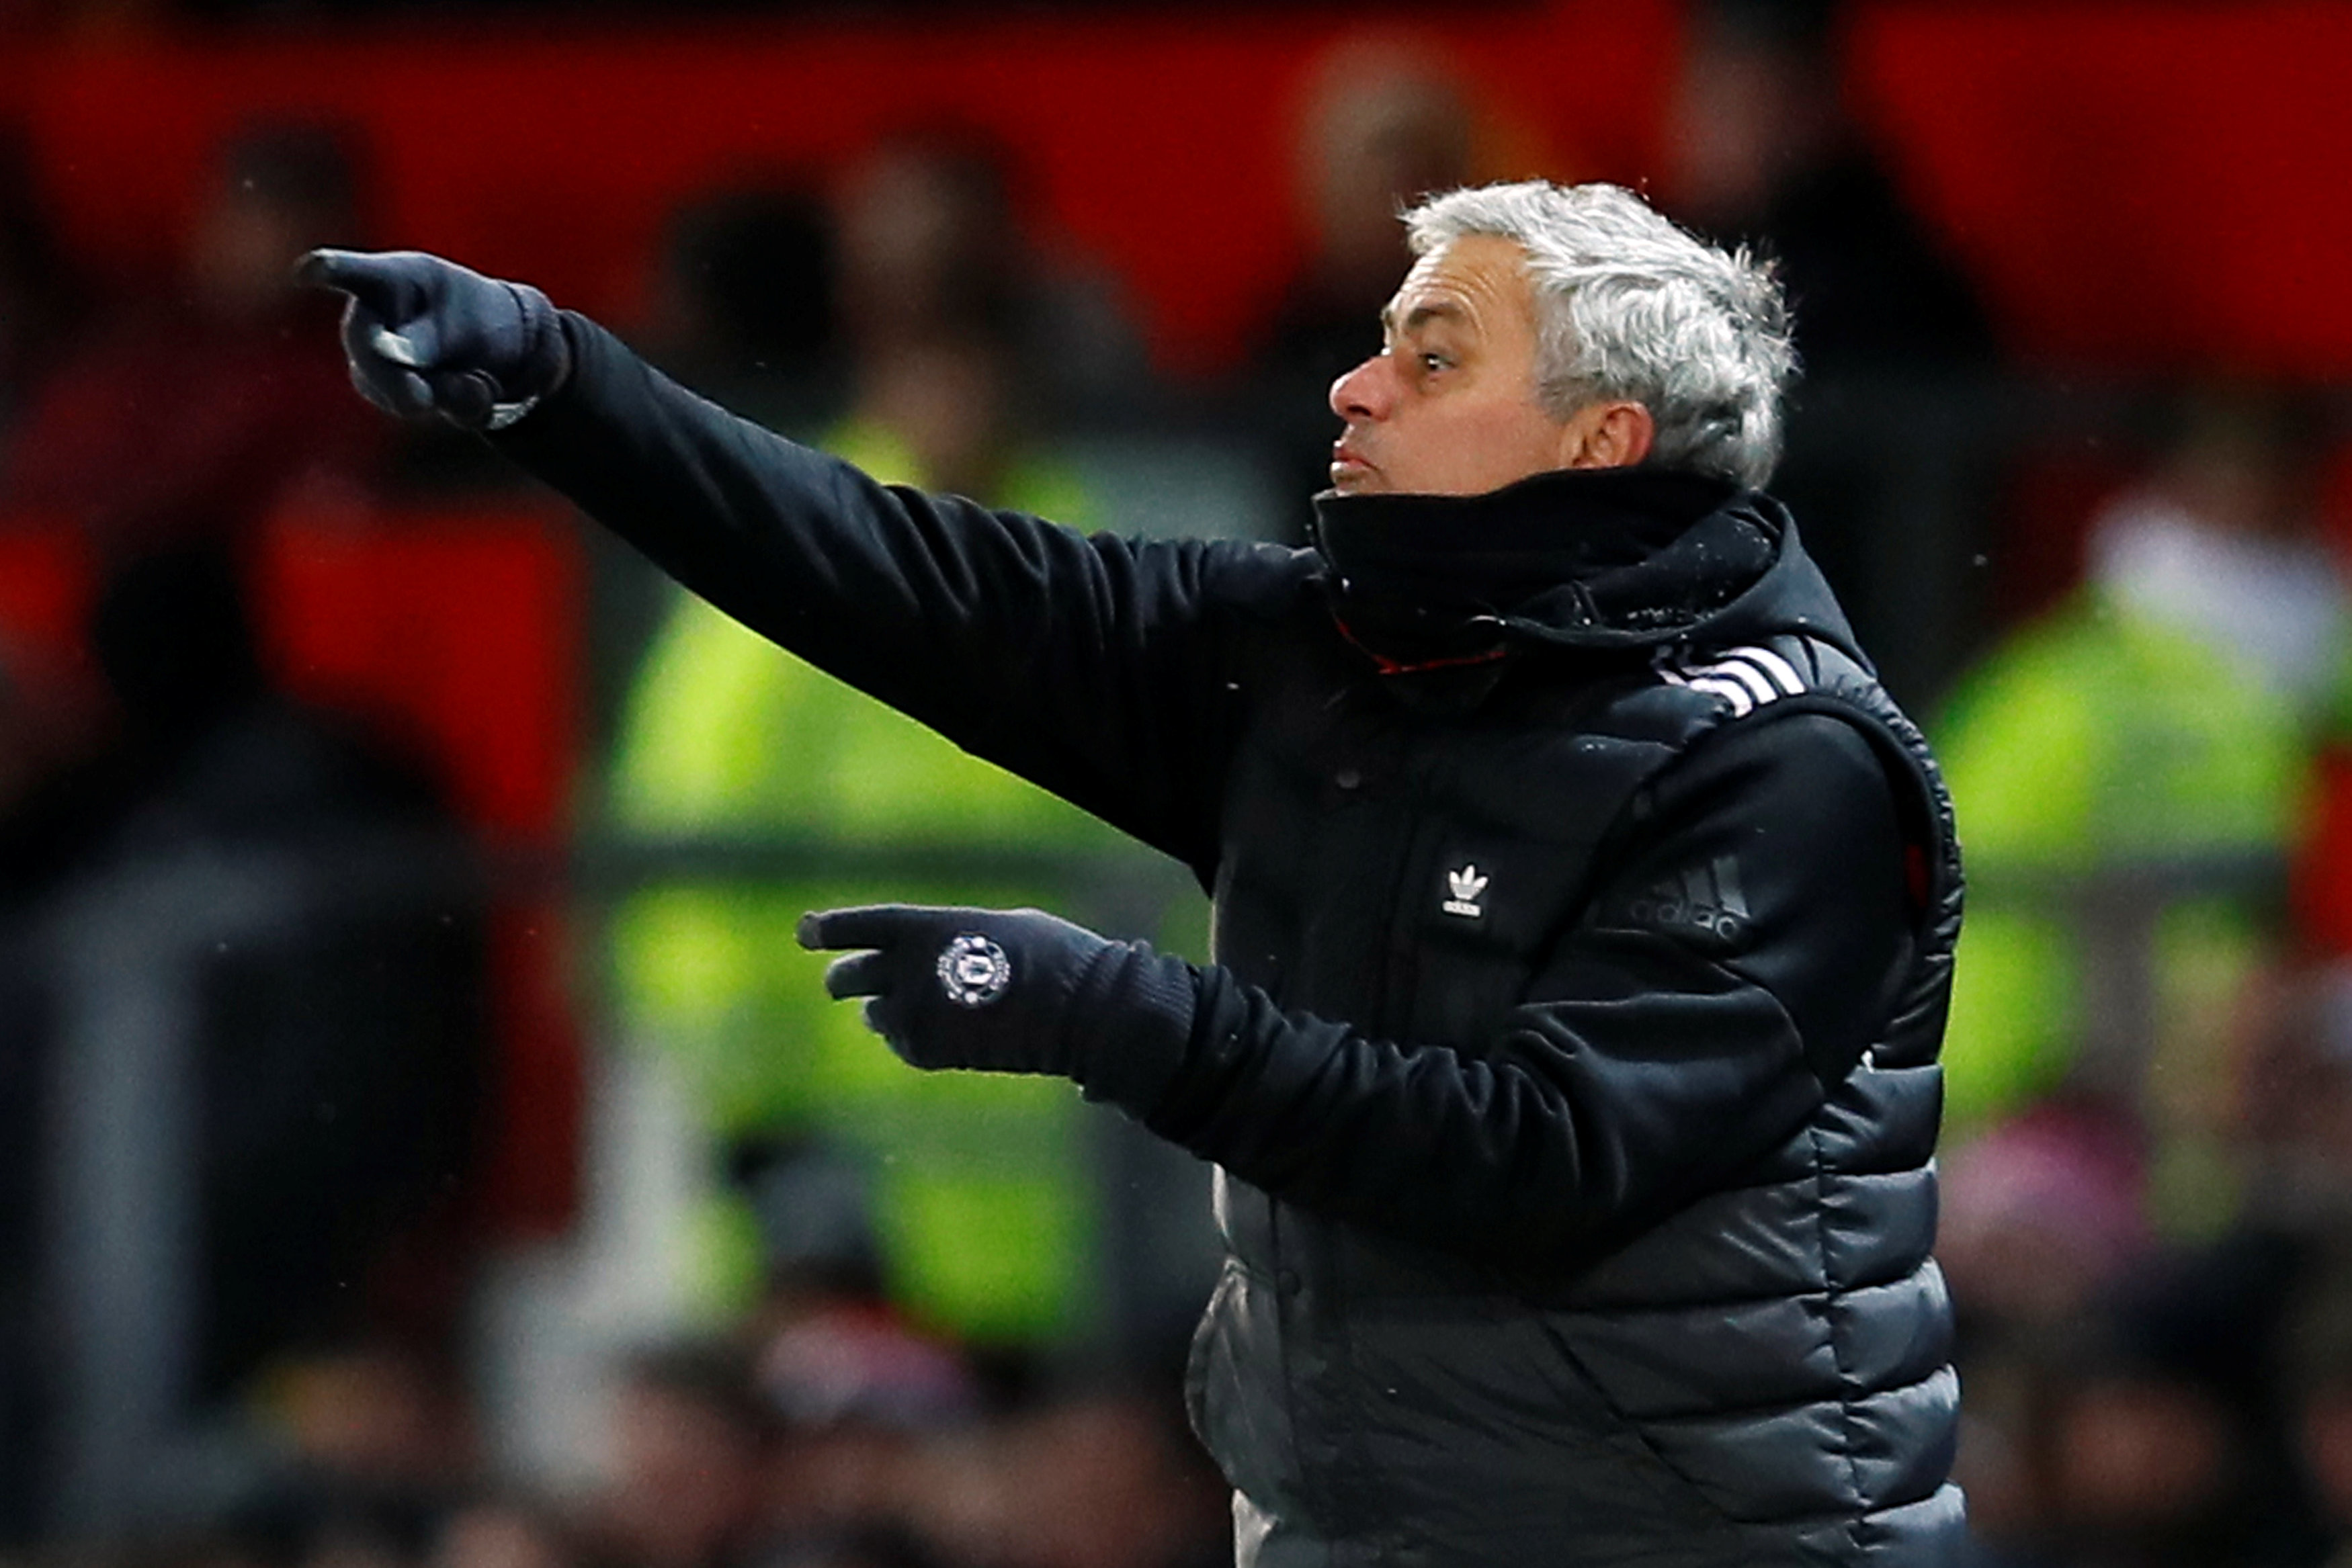 Football: Mourinho slams United's 'lack of personality and desire'